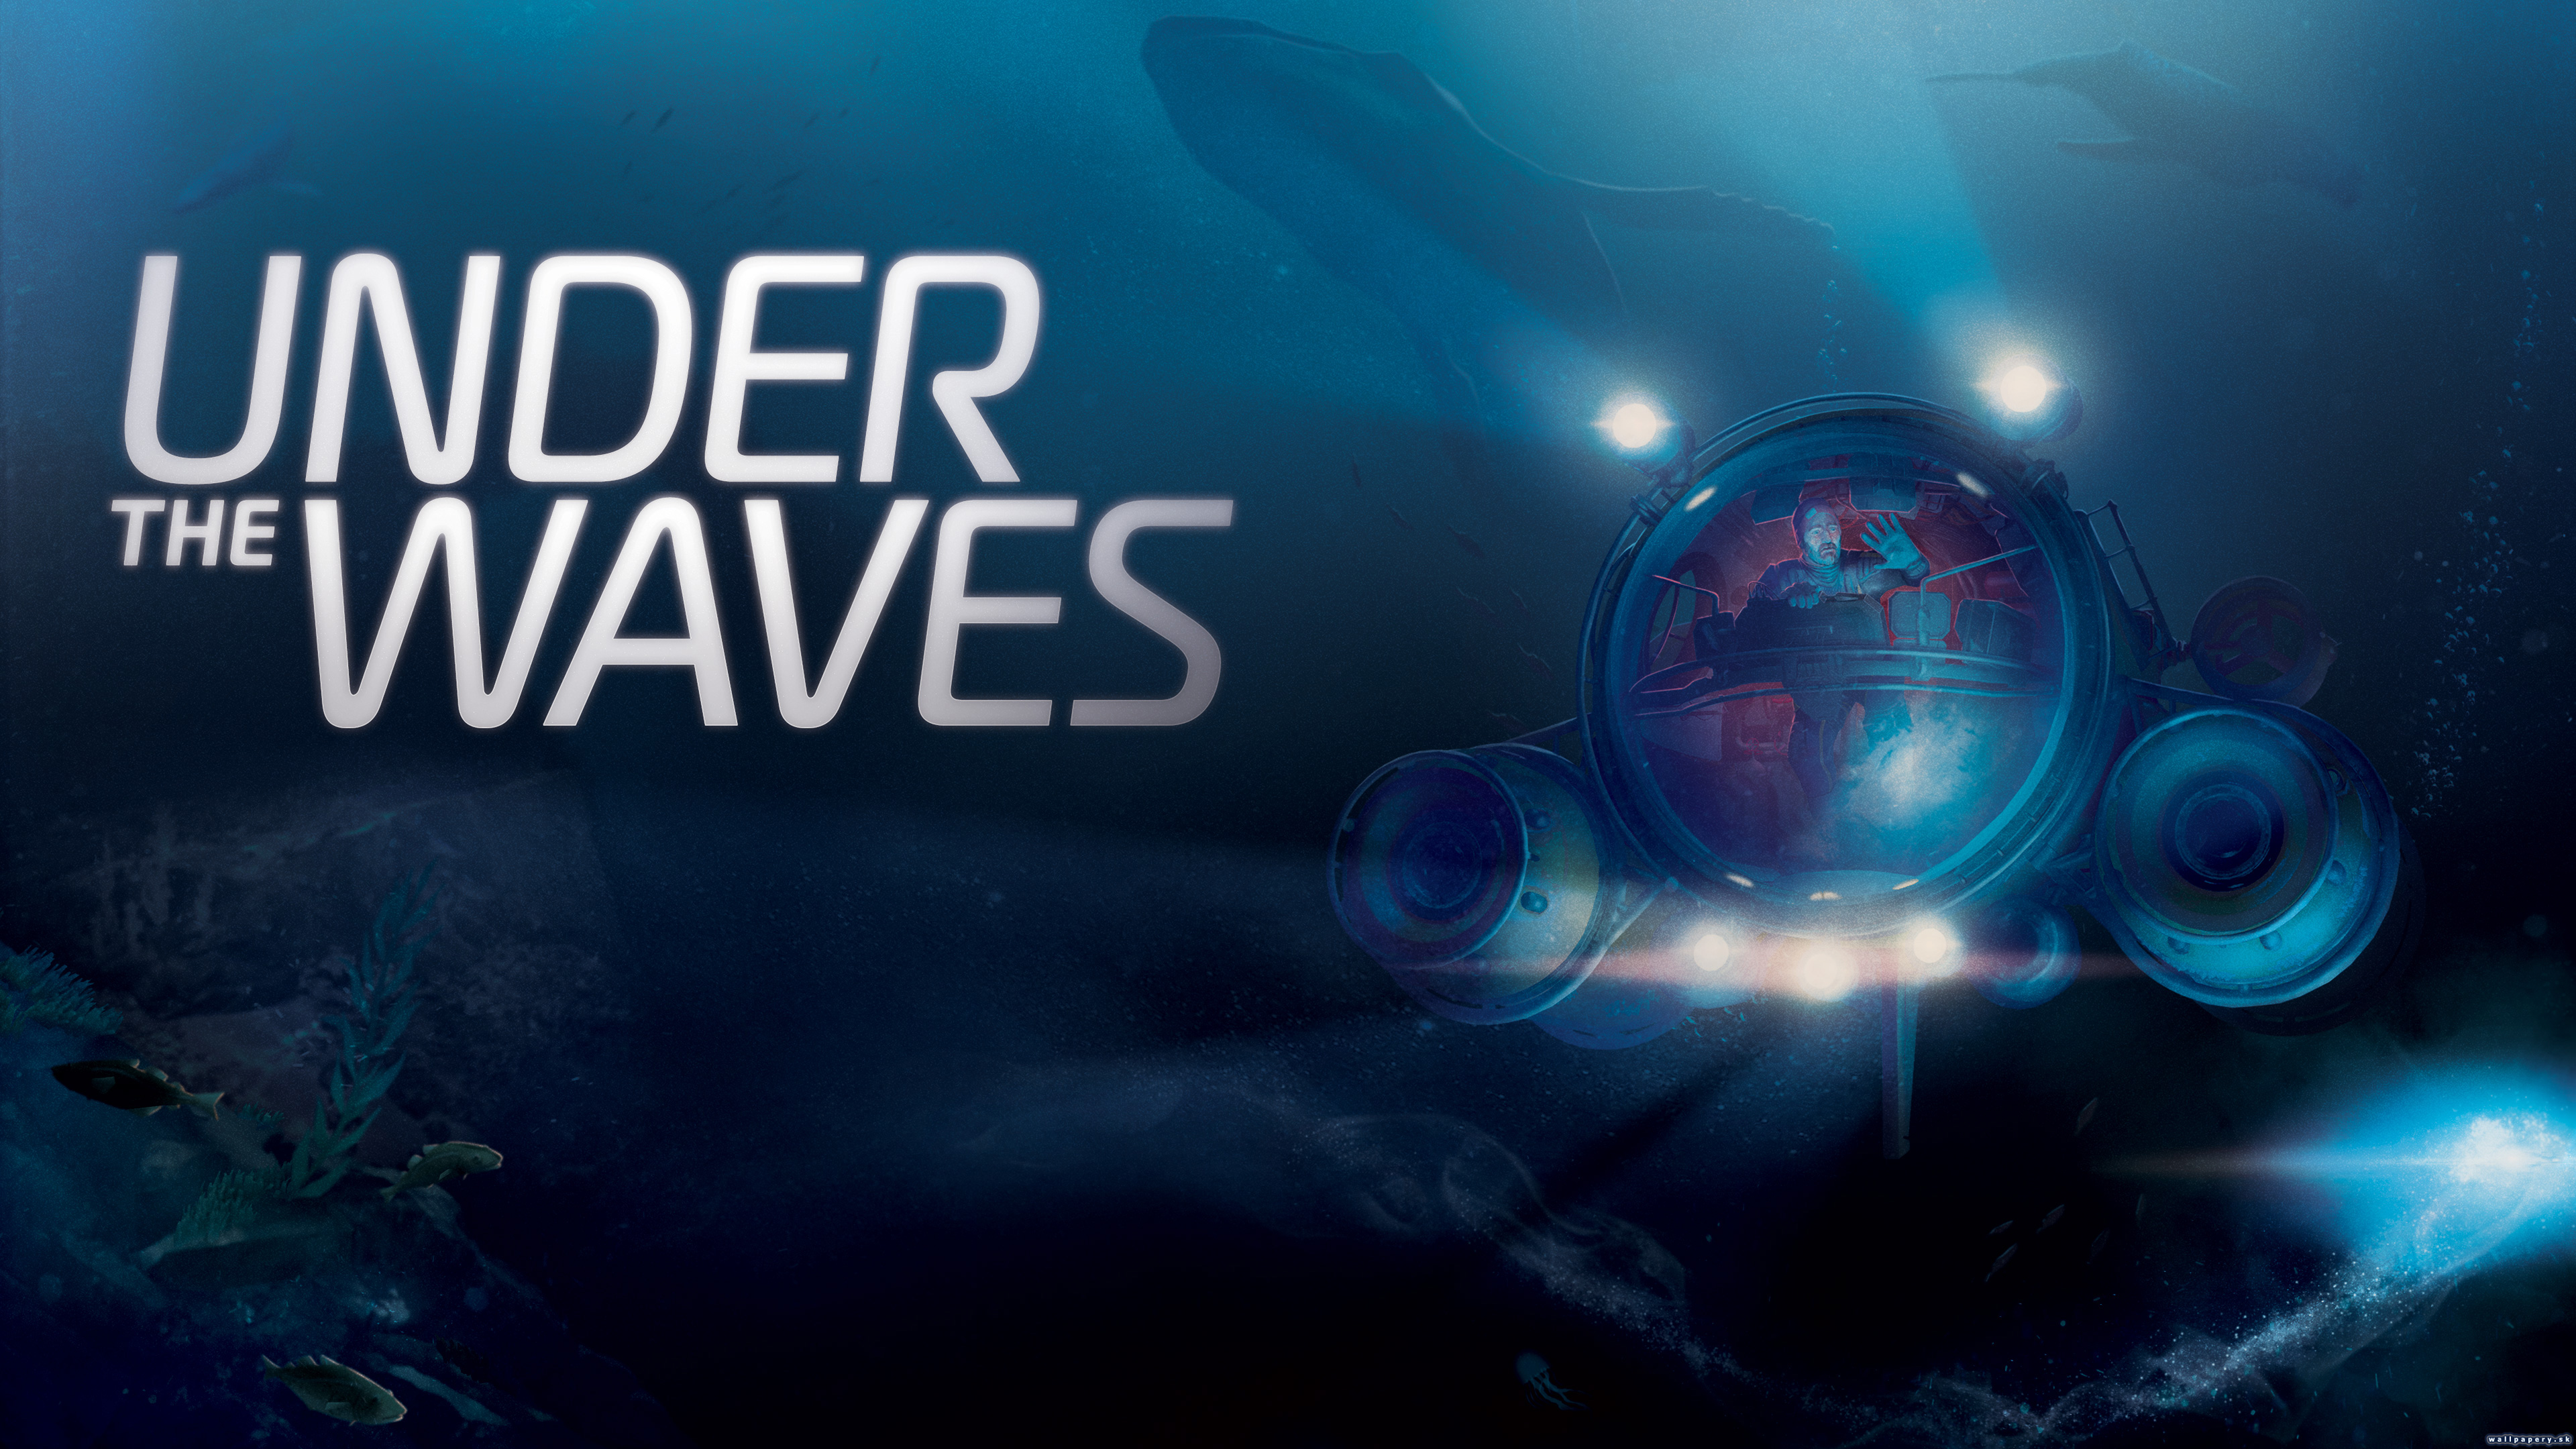 Under the Waves - wallpaper 1